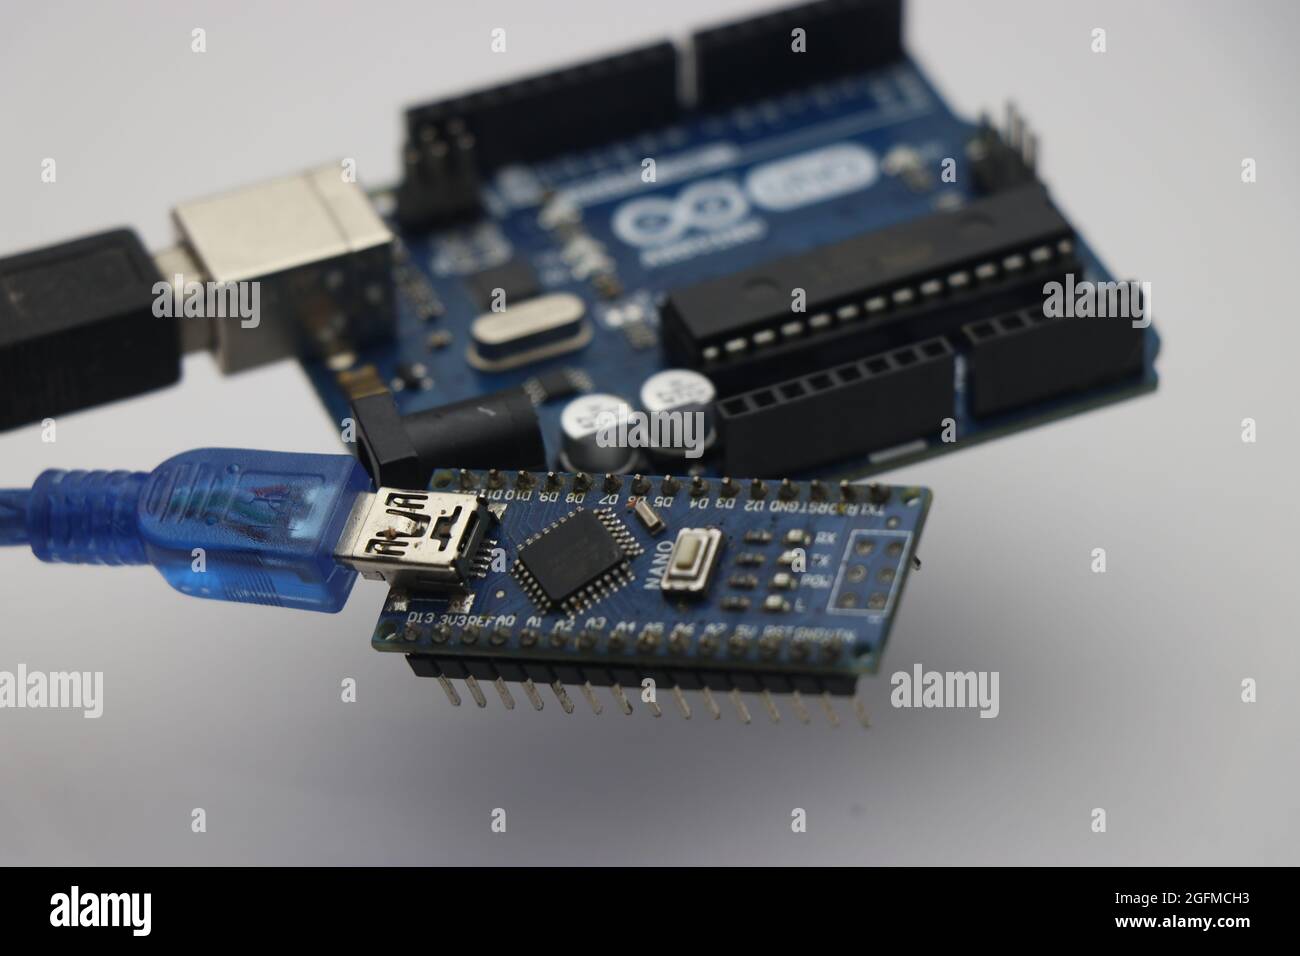 Bangalore, India - August 26 2021: Arduino nano and Arduino uno boards which are most popular with creative engineers to make new inventions Stock Photo